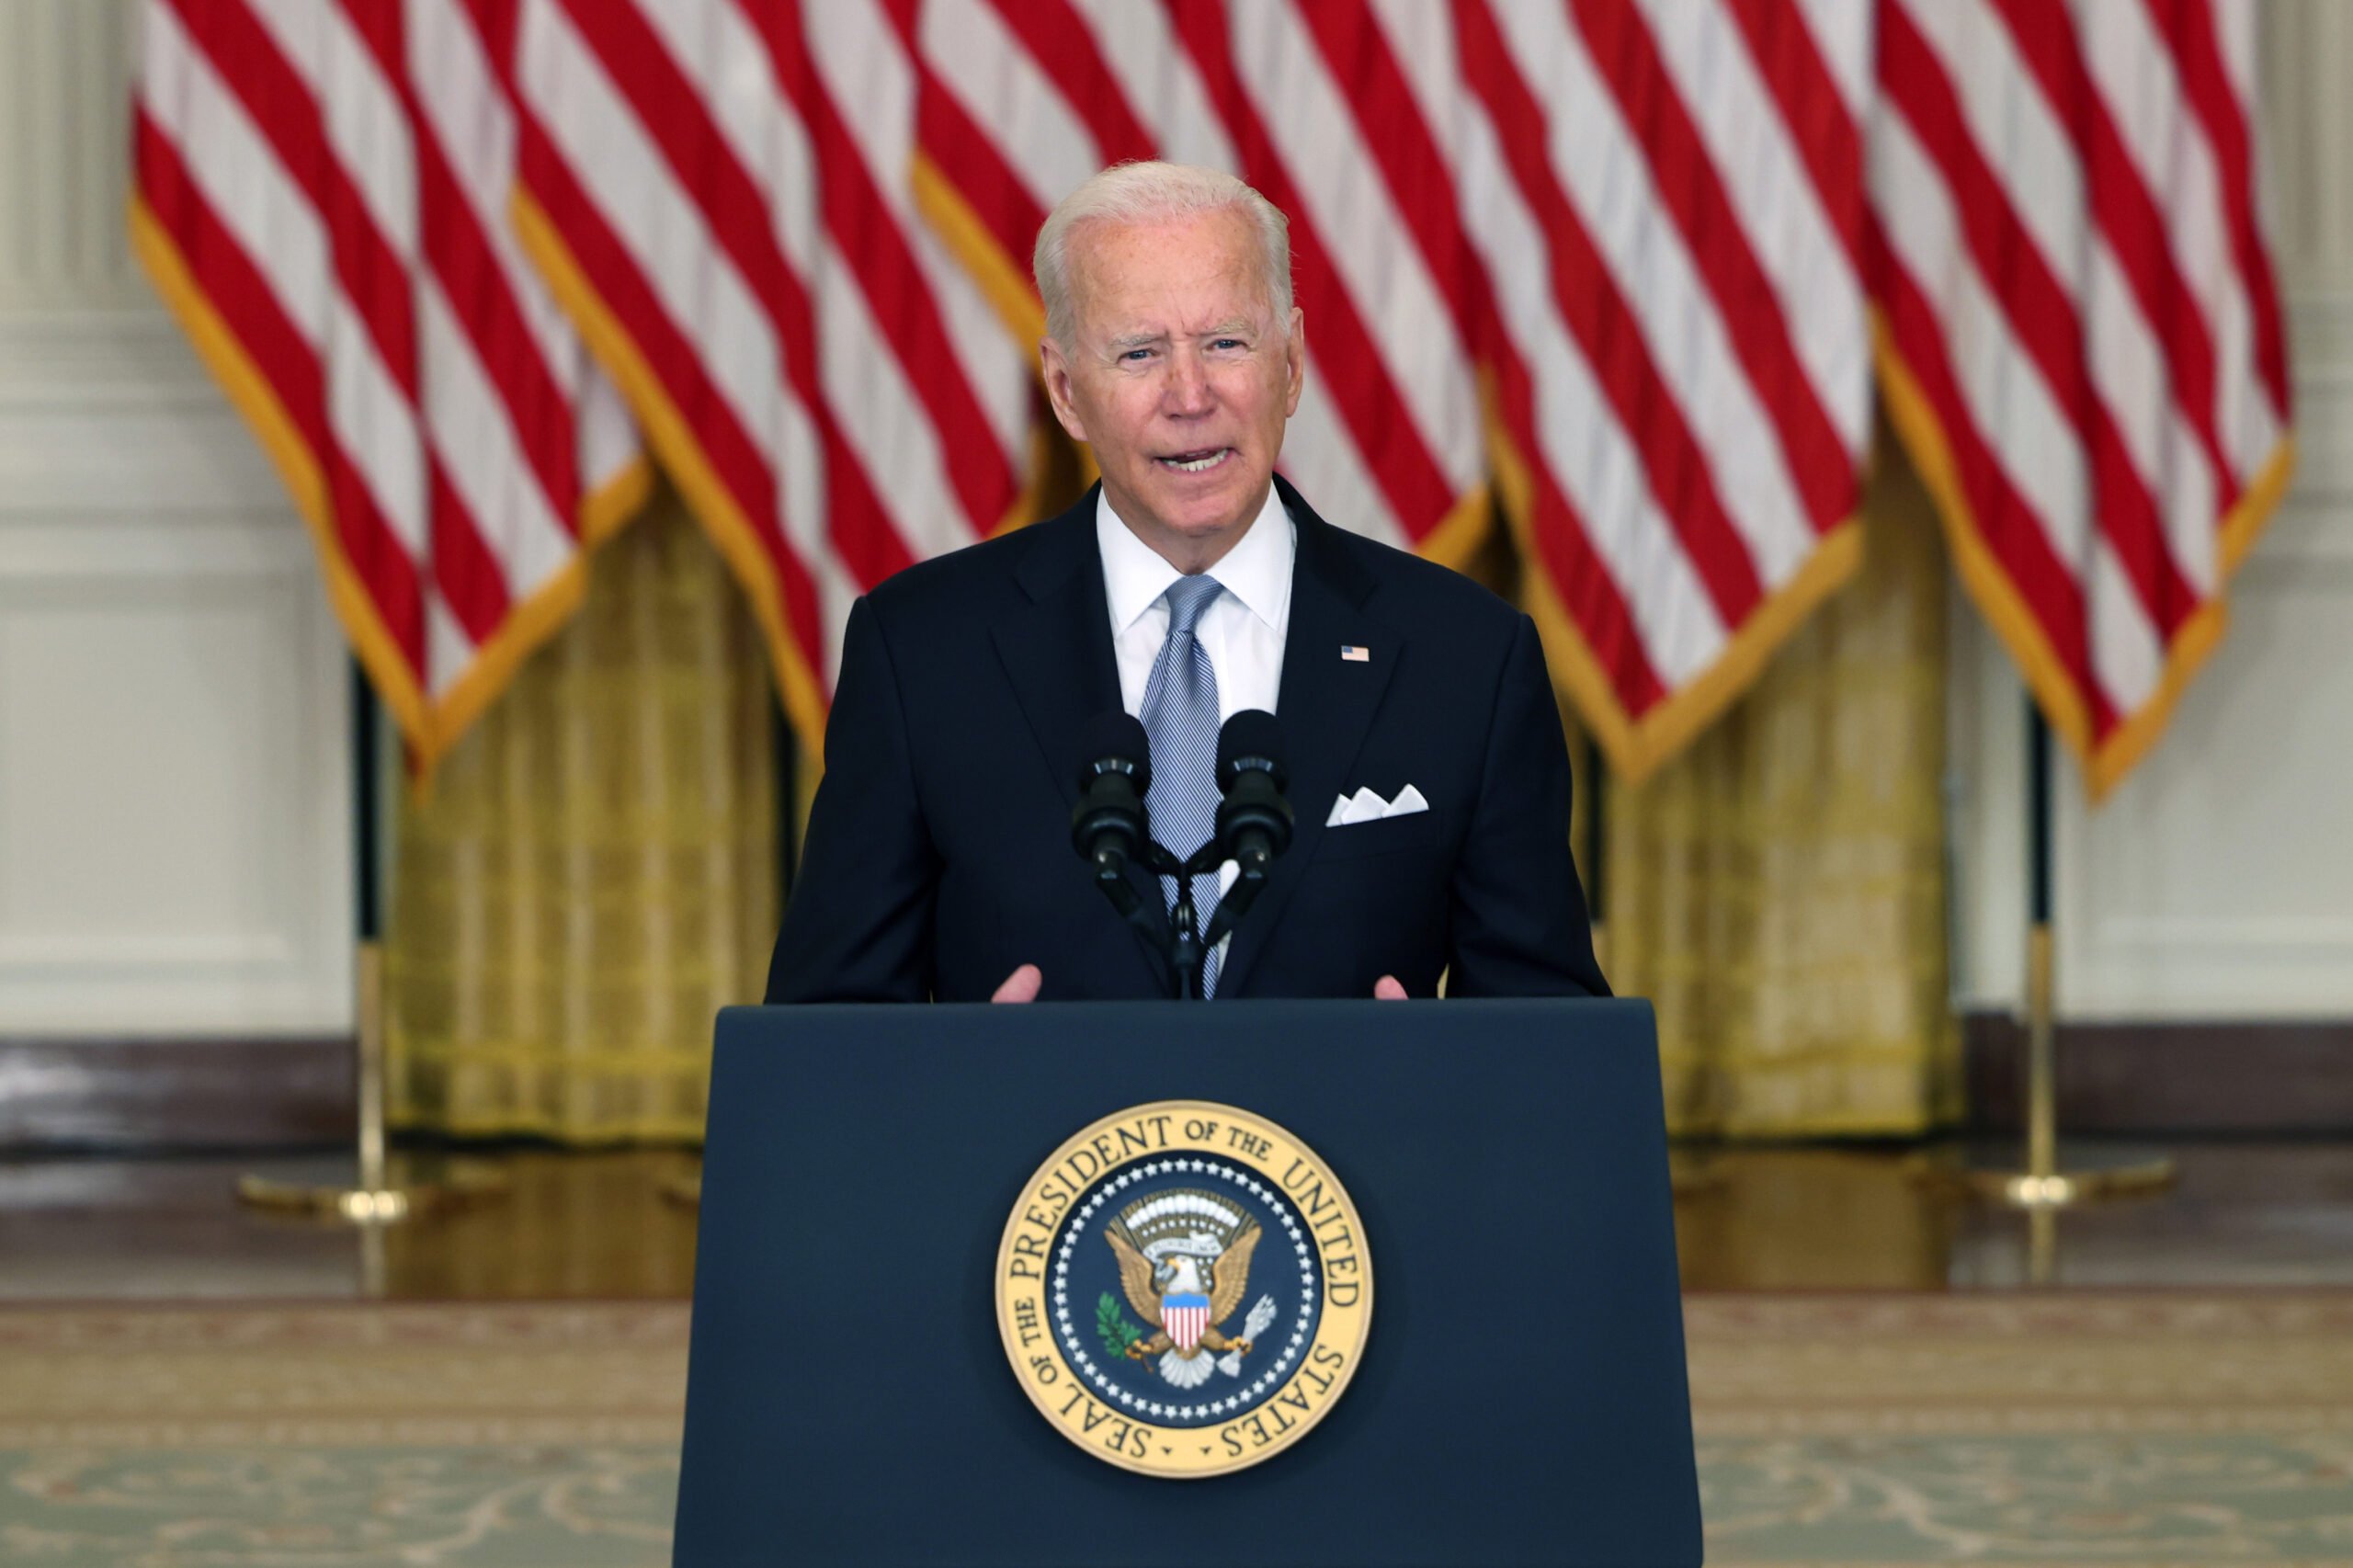 Biden vows U.S. forces will hunt down perpetrators of attacks near Kabul airport which killed dozens 10